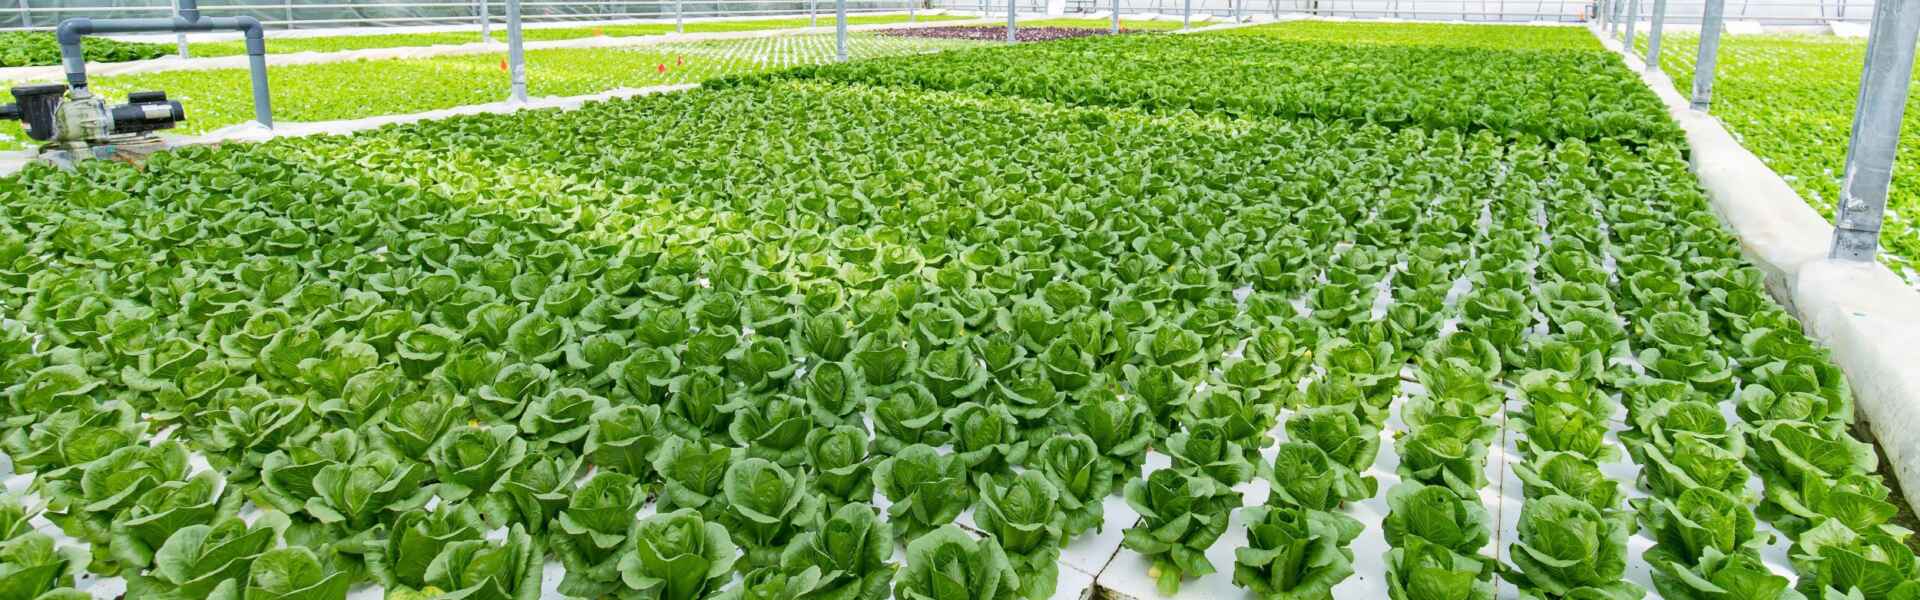 Heads of lettuce grow in a large white greenhouse